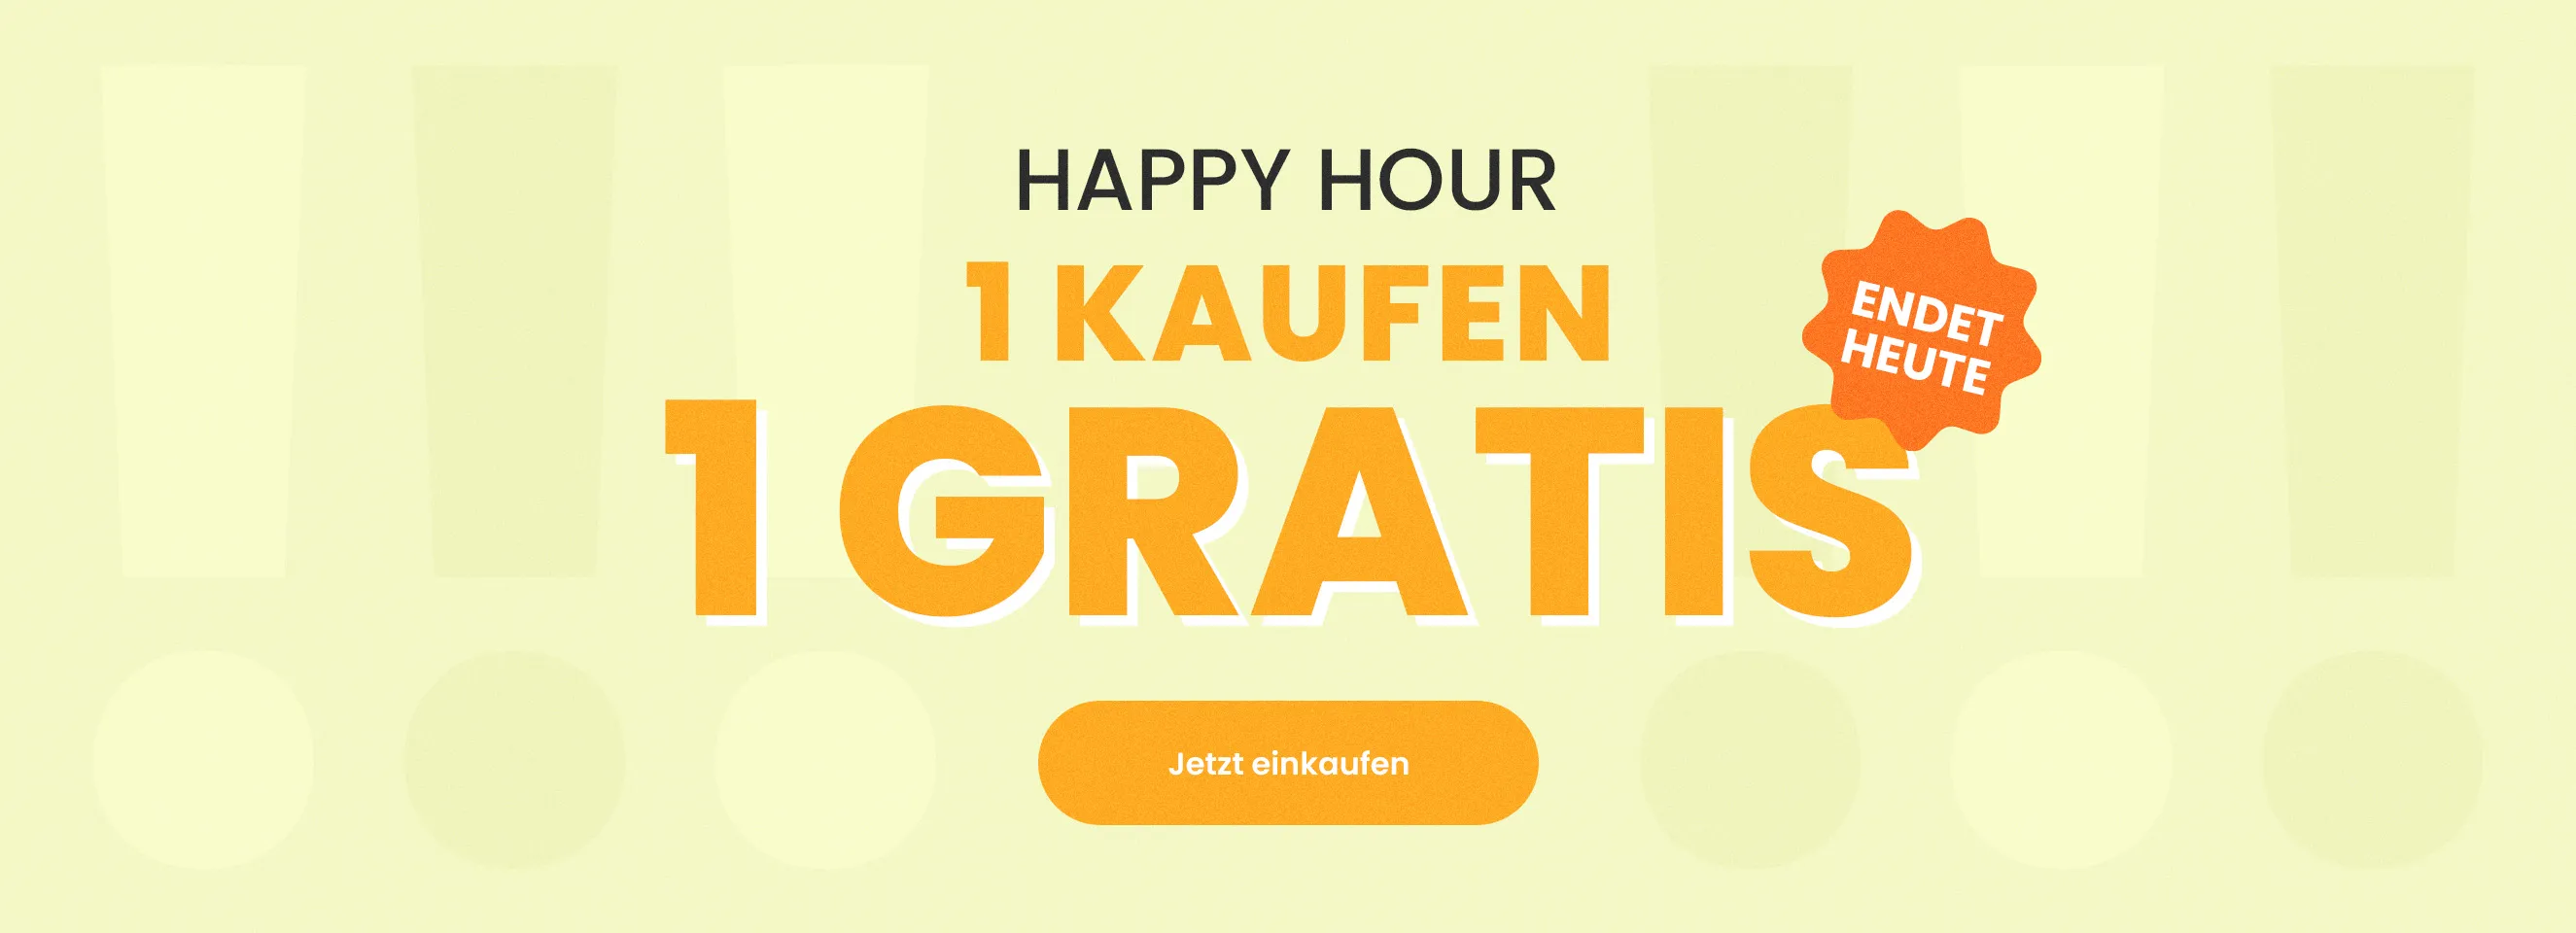 Click it to join Happy Hour activity